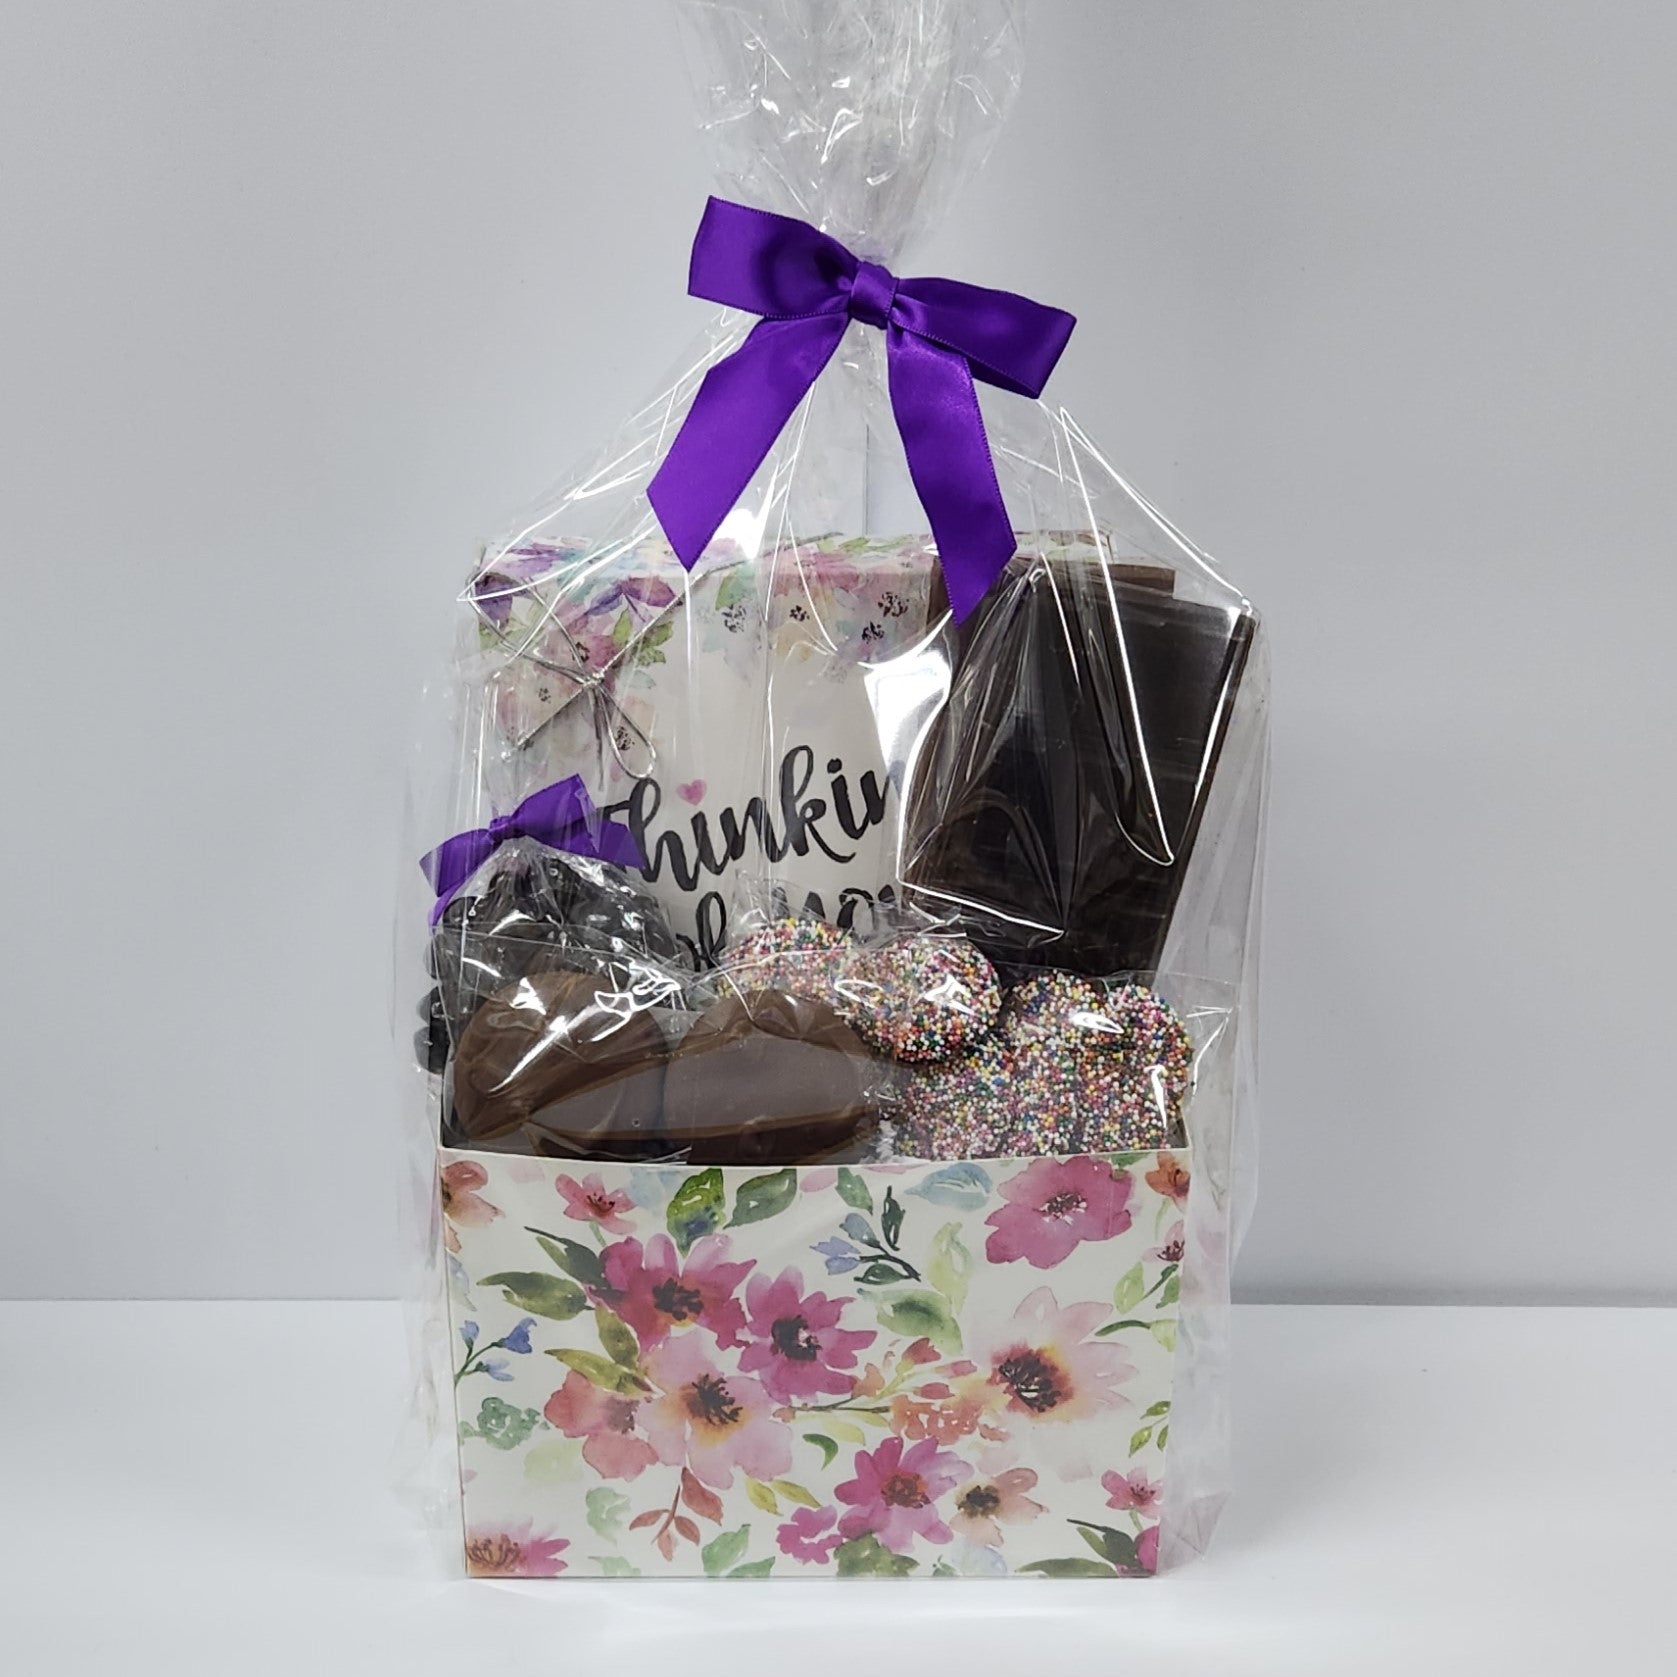 Thinking of You Chocolate Gift Basket from Stage Stop Candy wrapped in plastic with purple bow